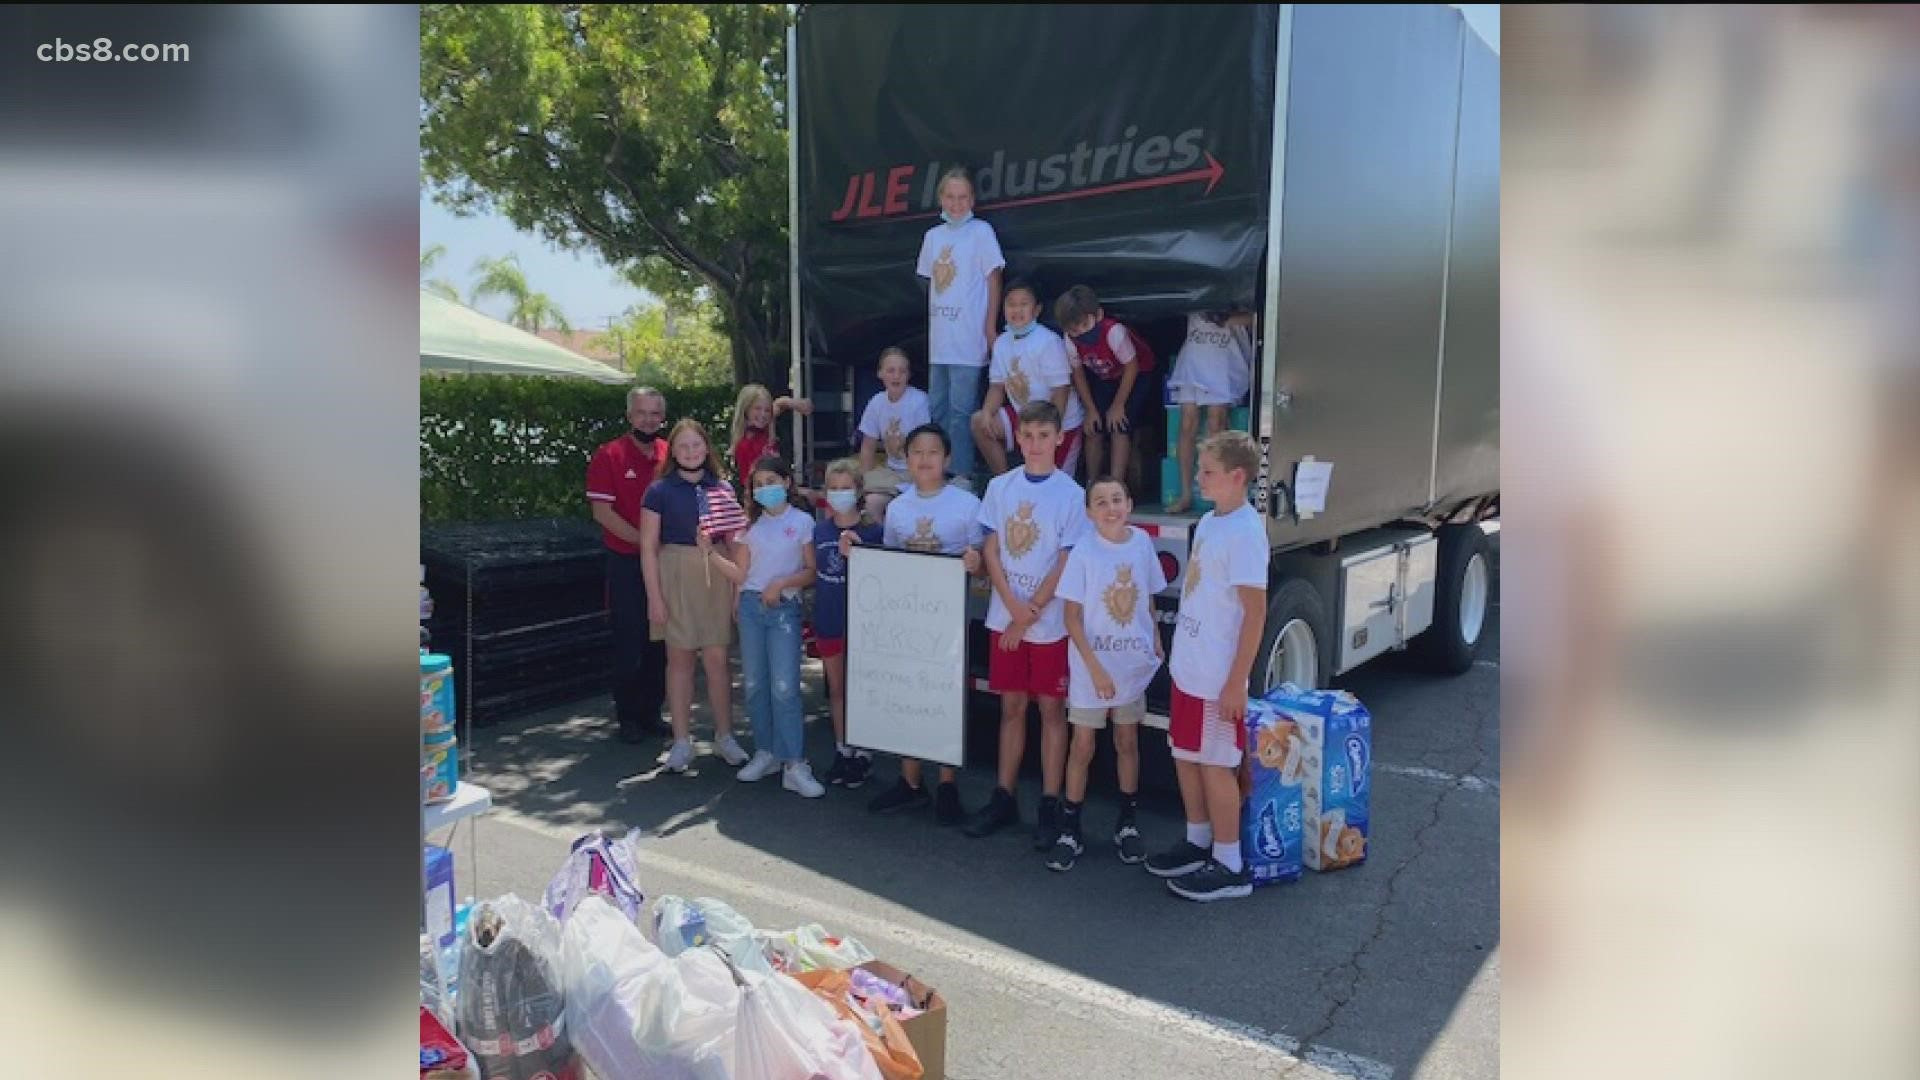 Moved by widespread need in New Orleans following Hurricane Ida, one local mom jumped into action by rounding up two 18-wheeler trucks filled with loads of supplies.